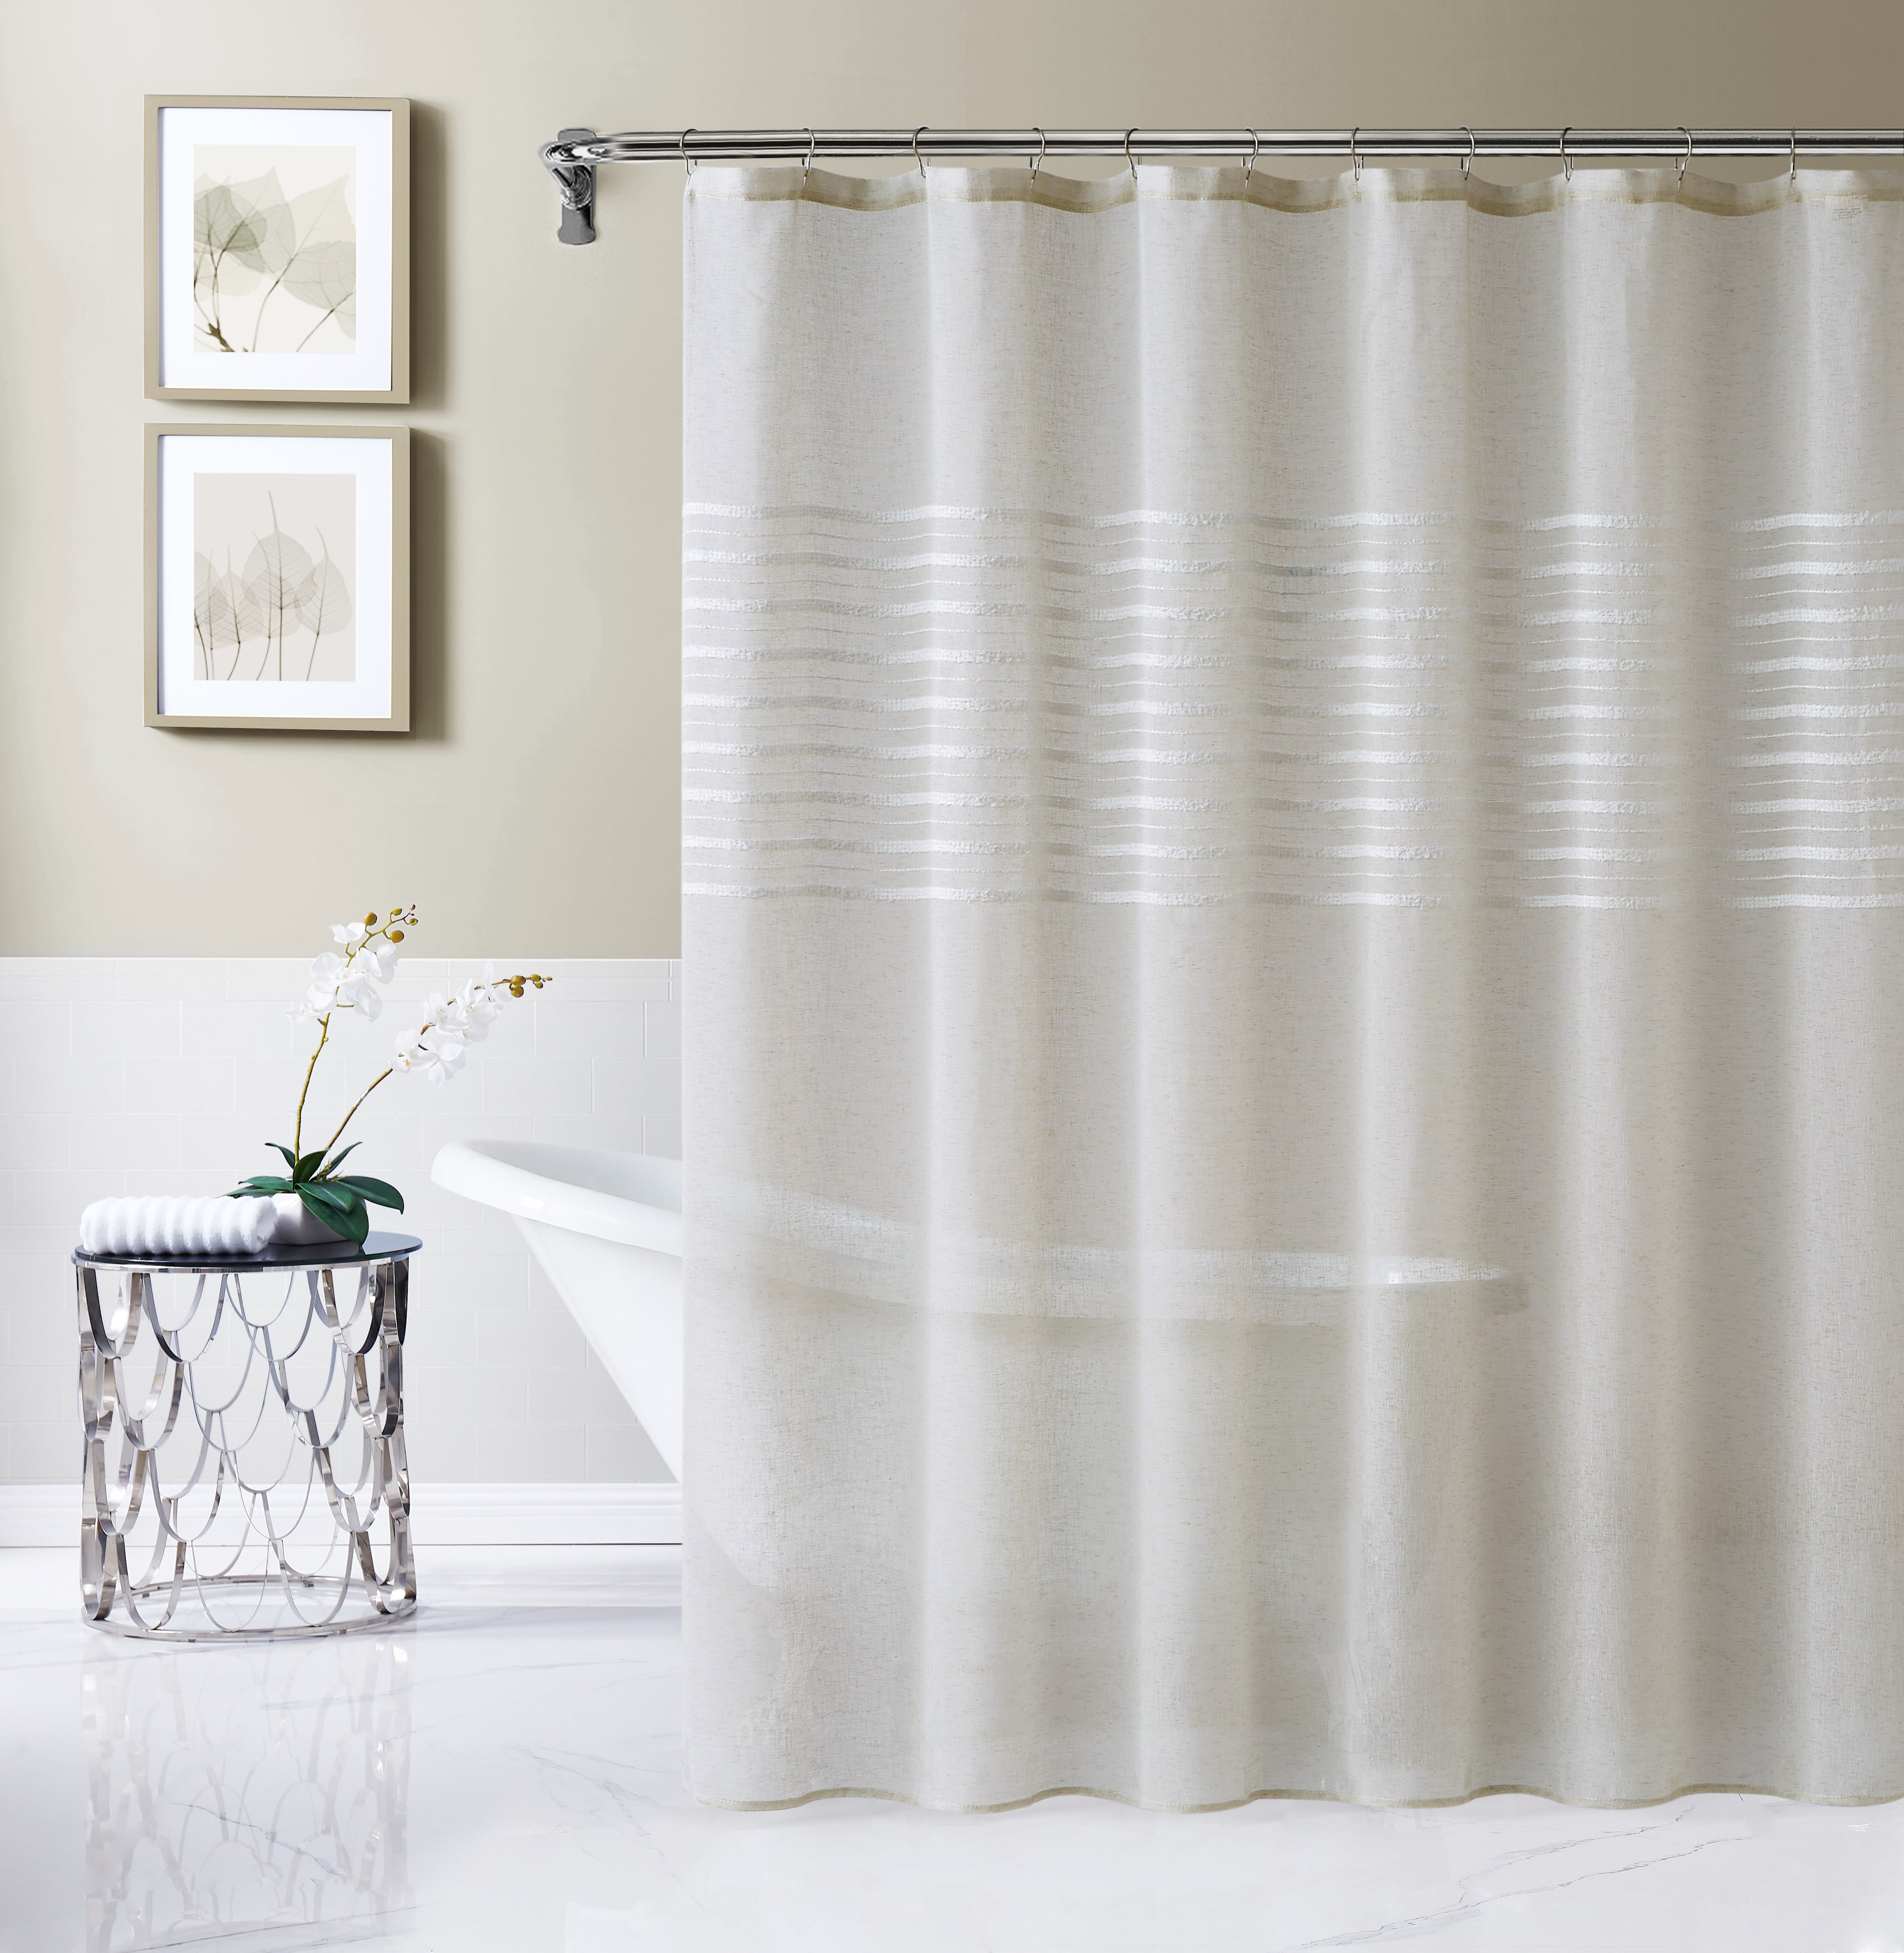 Dainty Home Daniella 3D Solid Linen Look Textured Striped 3D Chenille Designed Fabric Shower Curtain